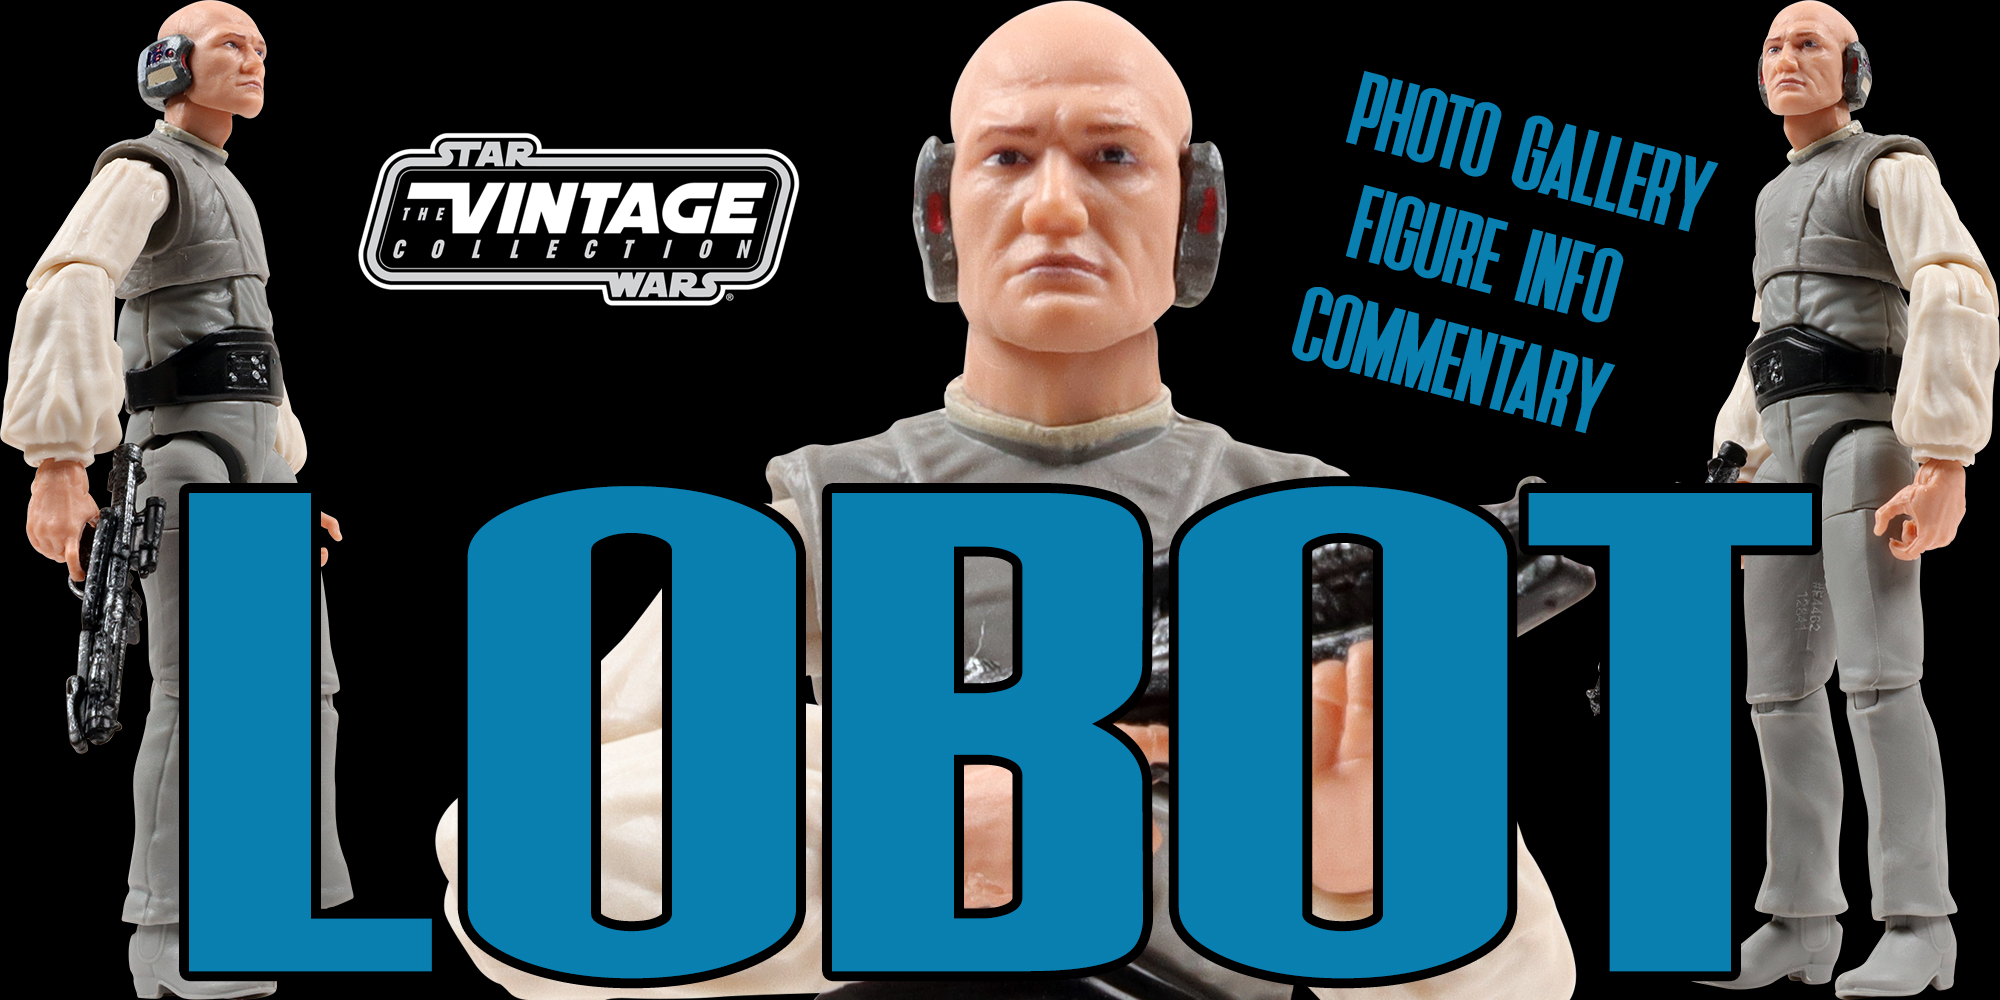 The Vintage Collection Lobot - Now Archived!